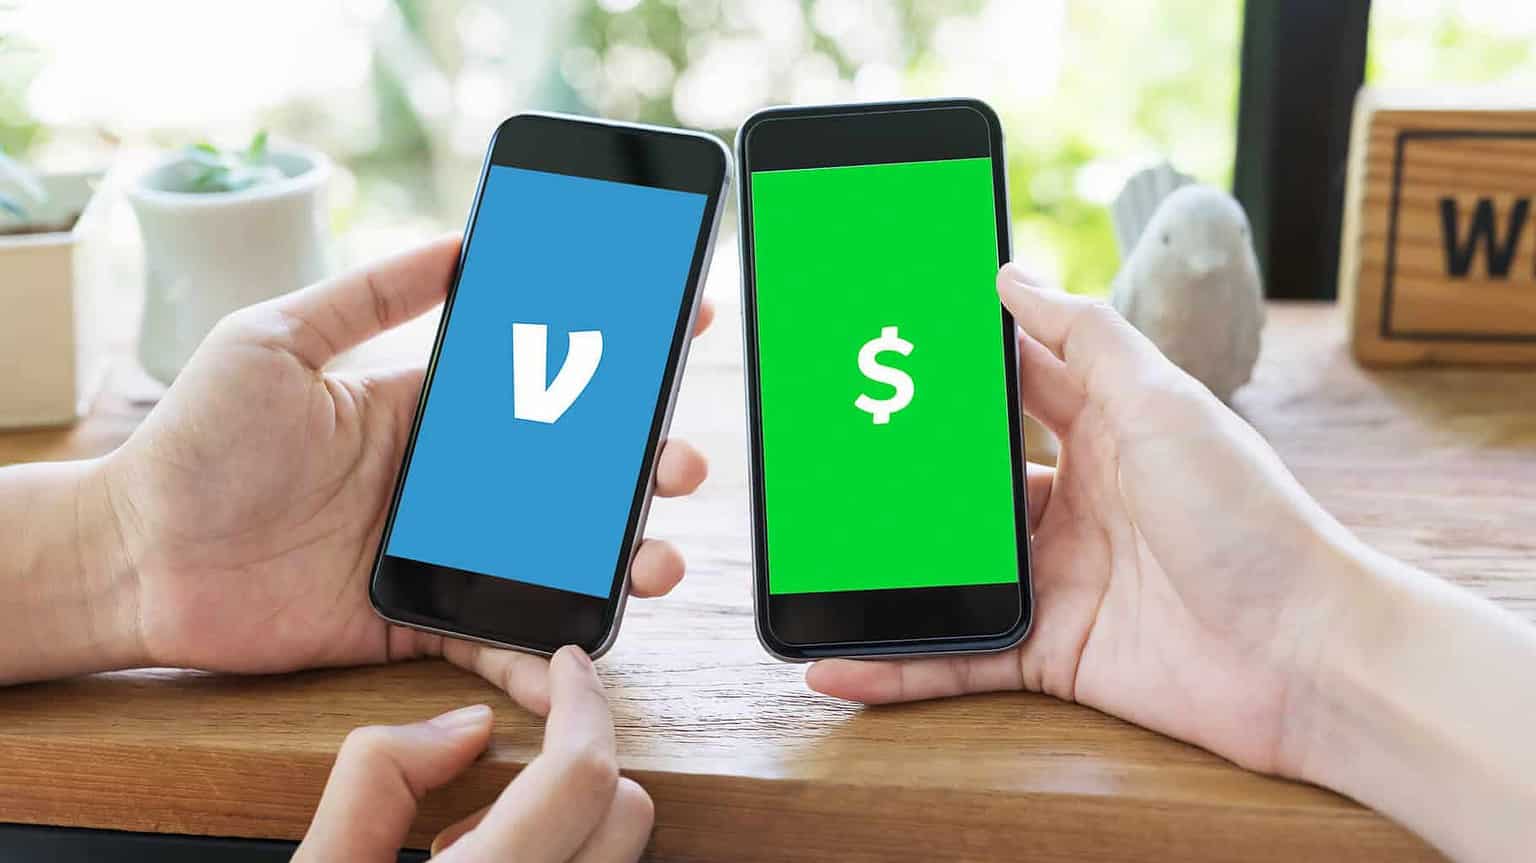 can you transfer money from venmo to coinbase